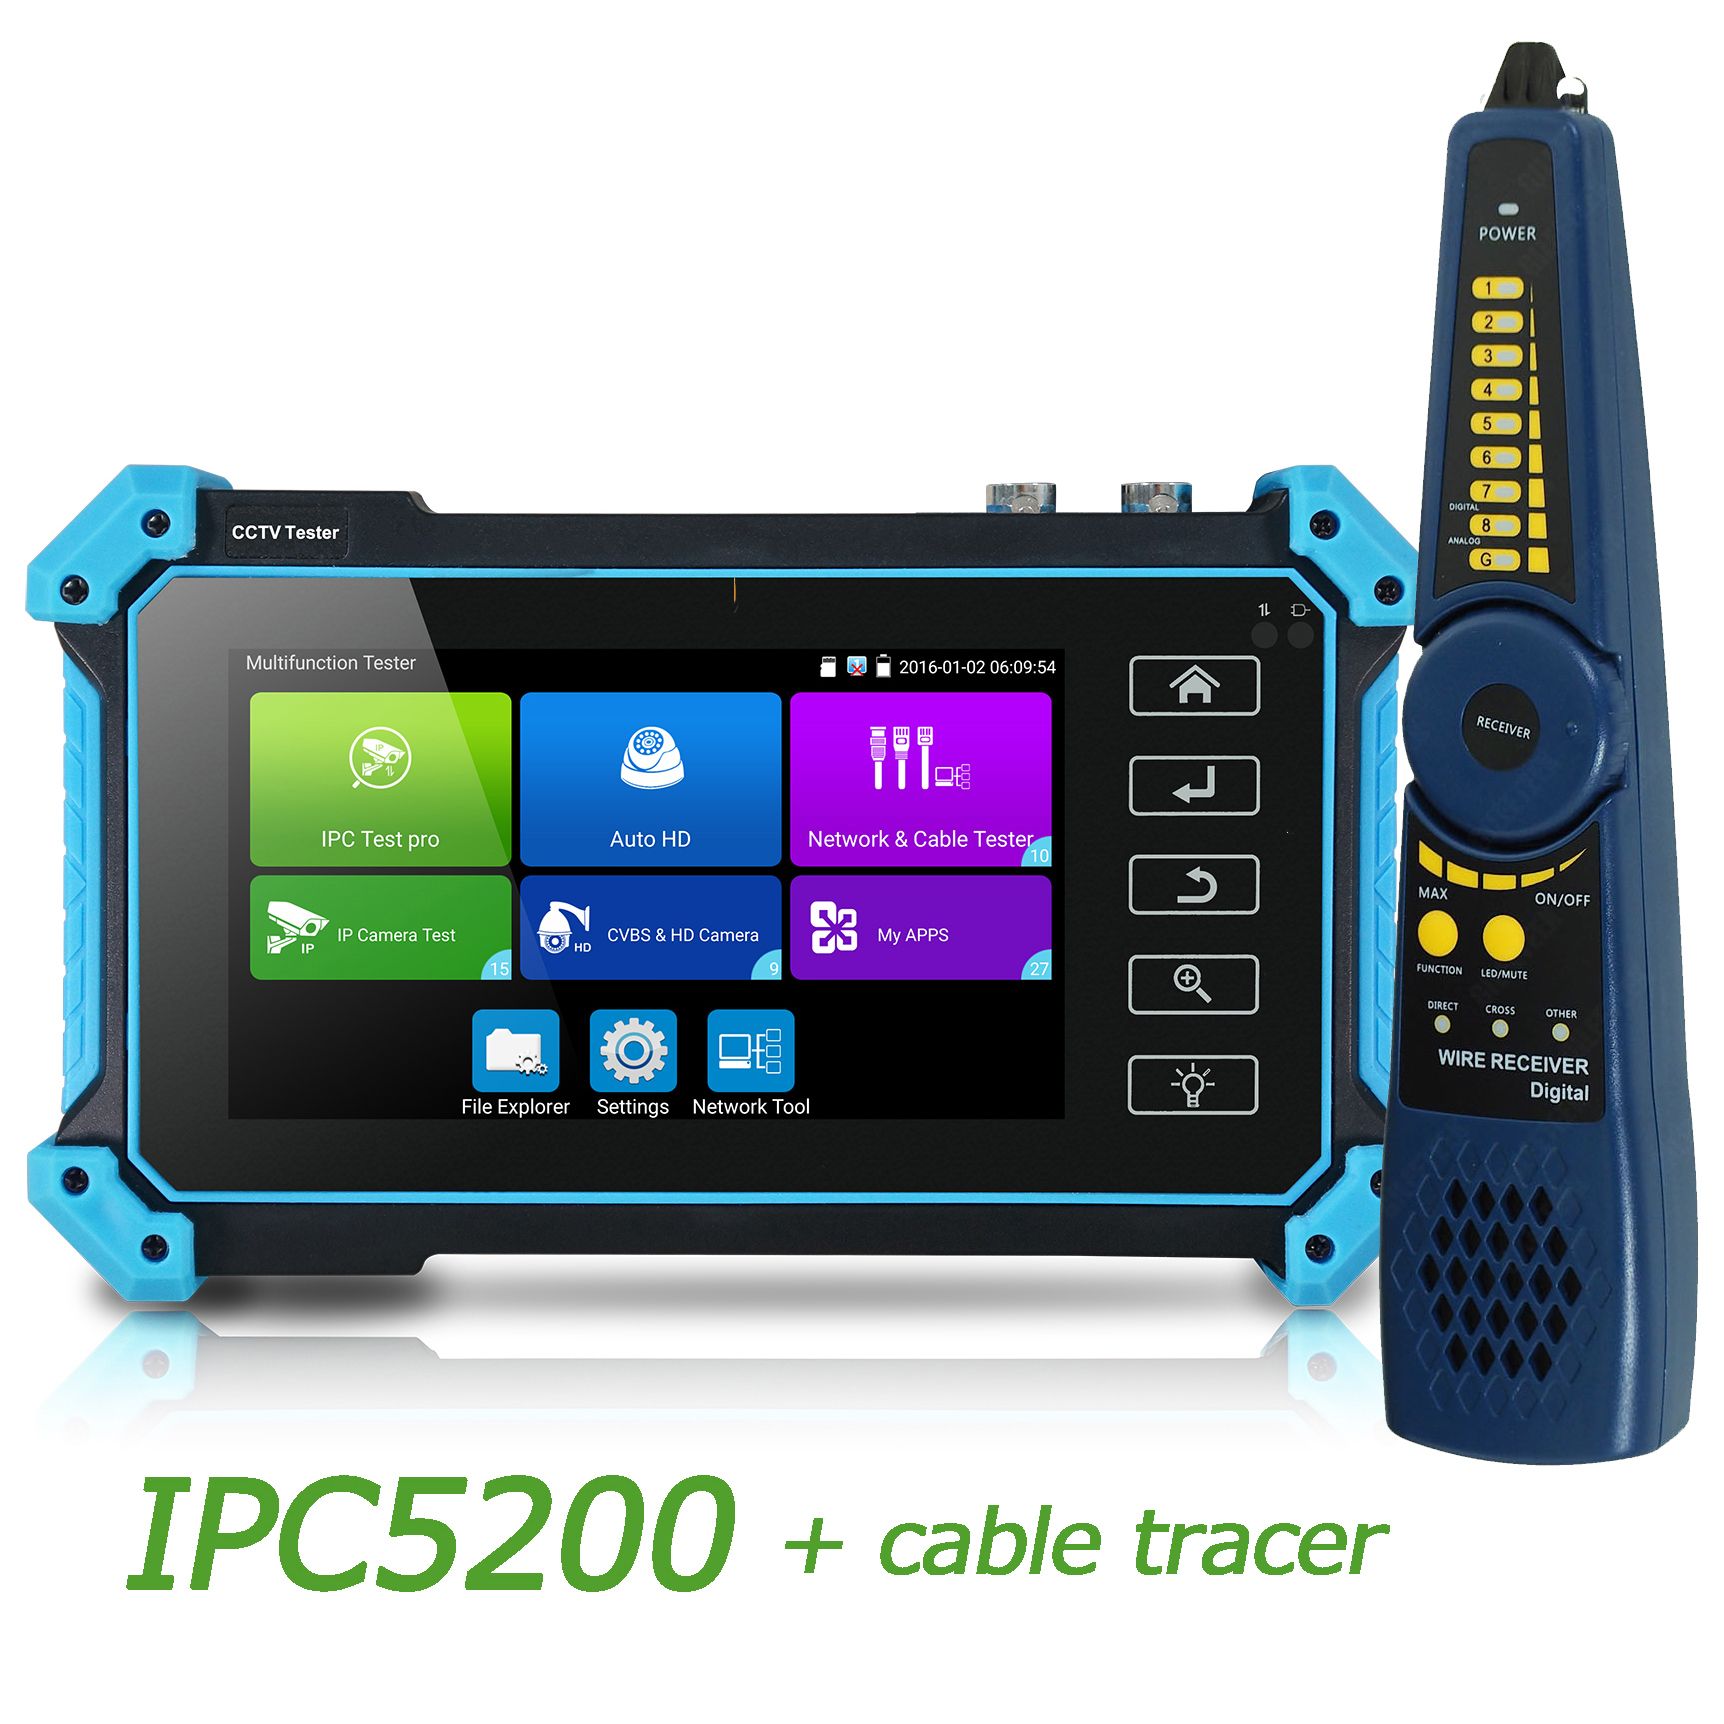 Ipc5200 with Tracer